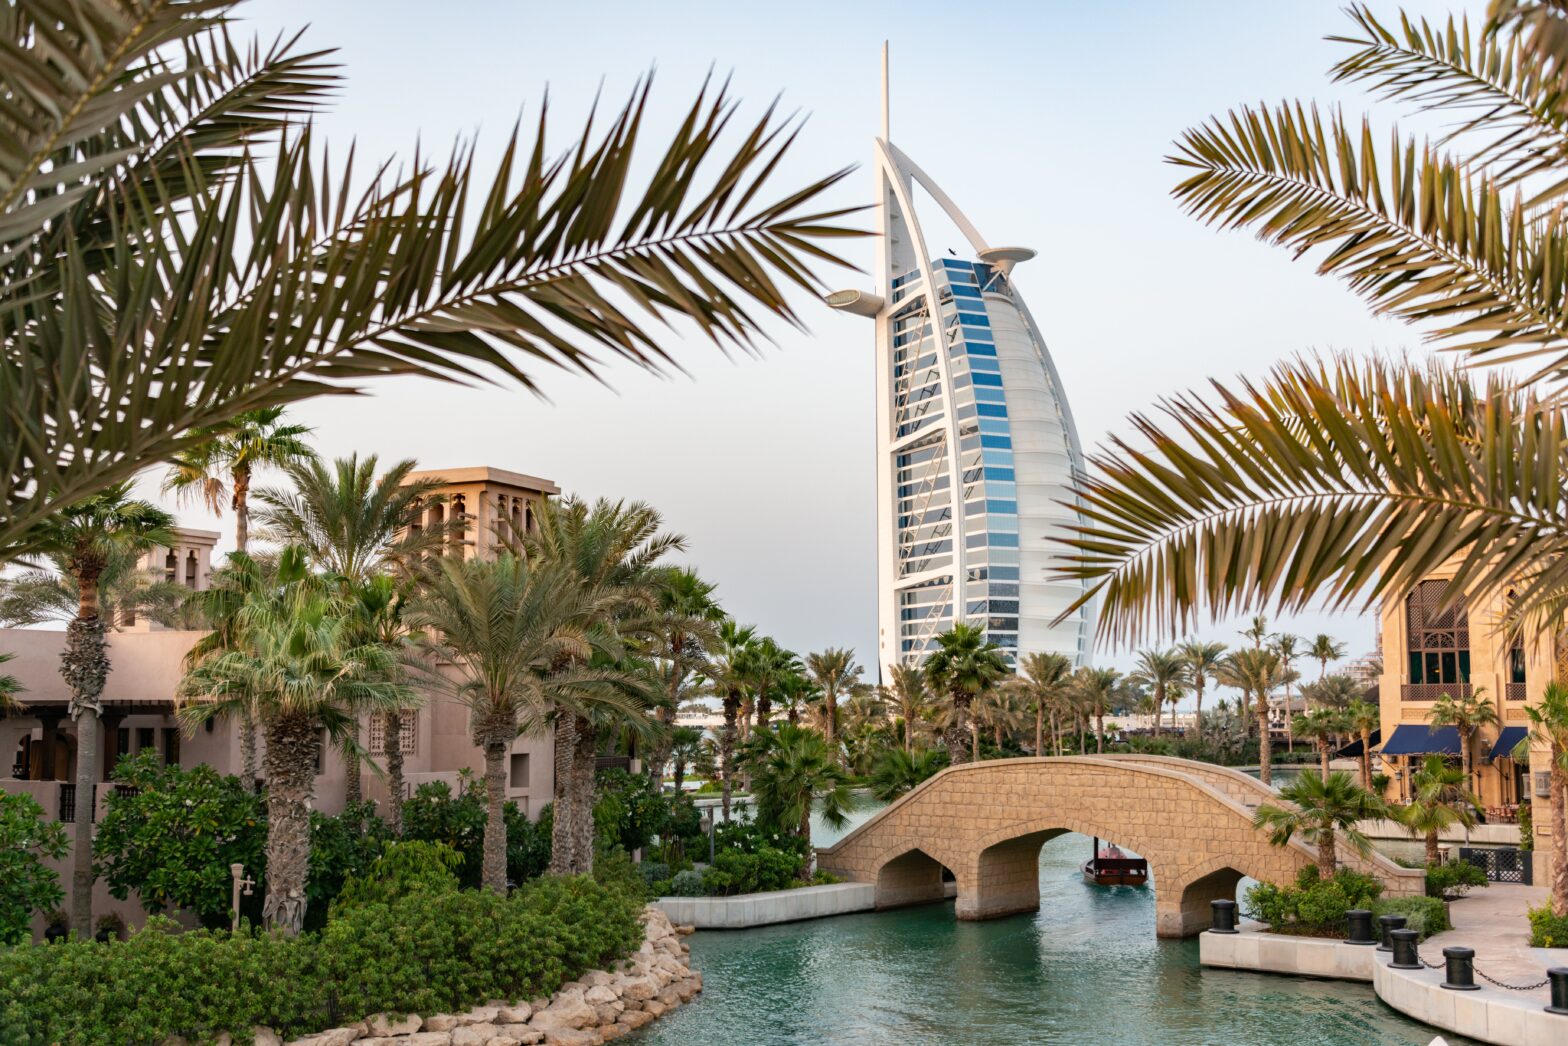 Why This Dubai Stay Is Unofficially Ranked A 7-Star Hotel